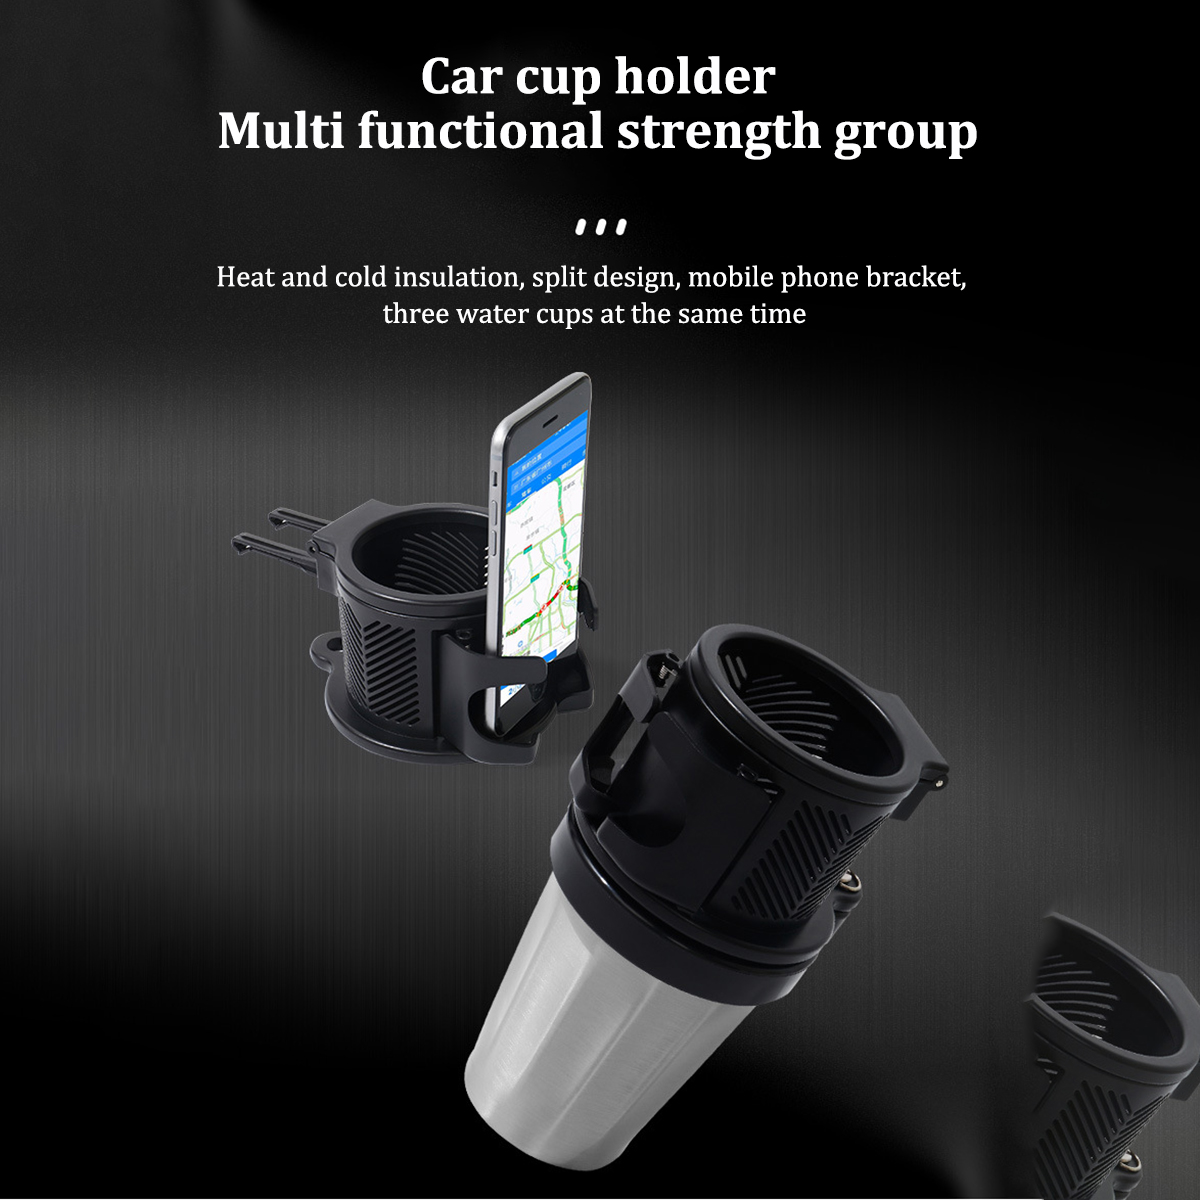 5-IN-1-Multifunctional-Split-Design-Car-Stainless-Steel-Water-Cup-Holder-with-Mobile-Phone-Bracket-S-1875639-5